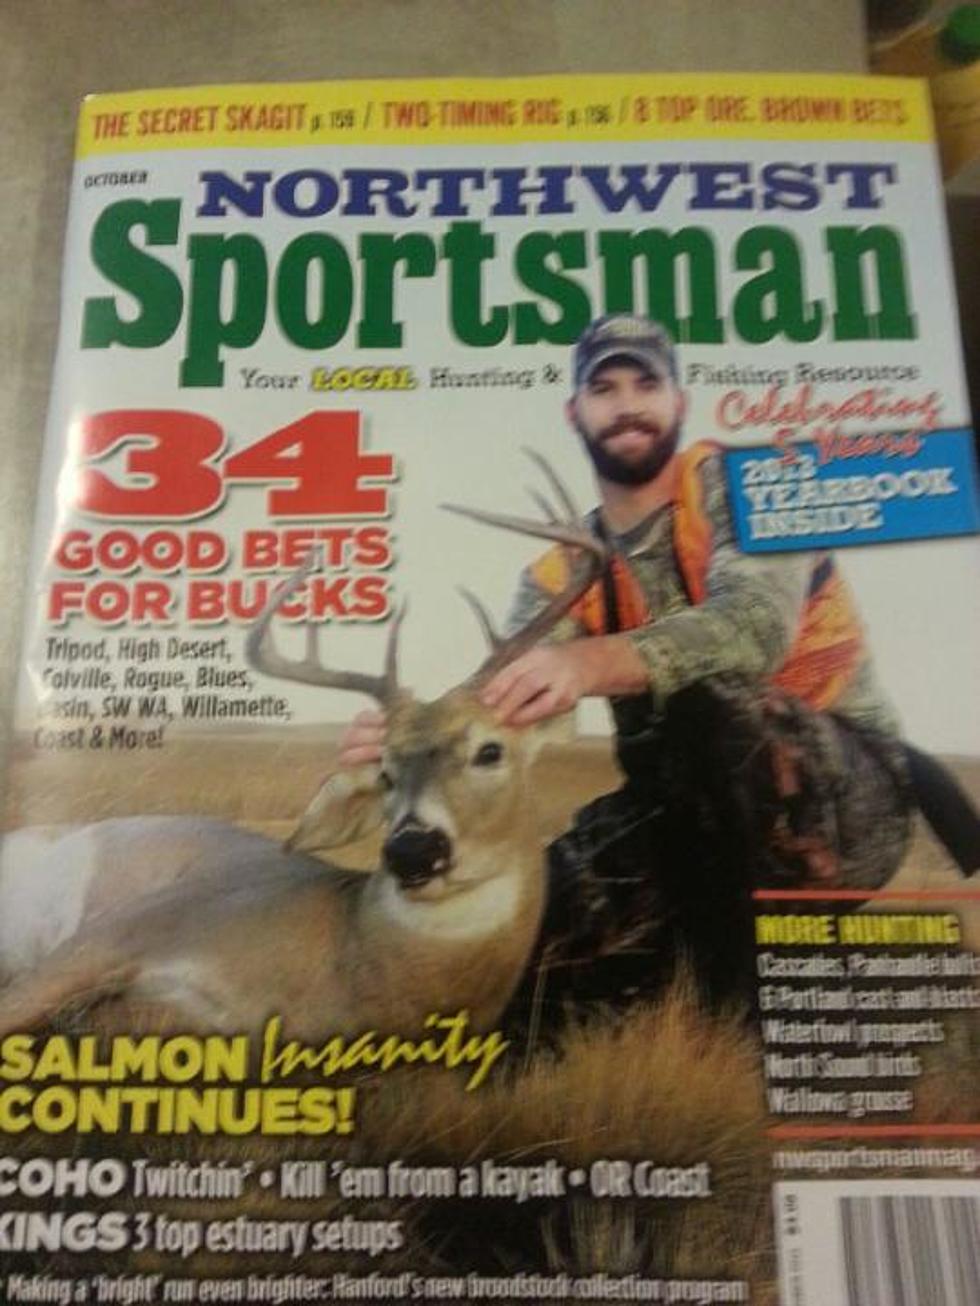 Selah Local Makes The Cover!